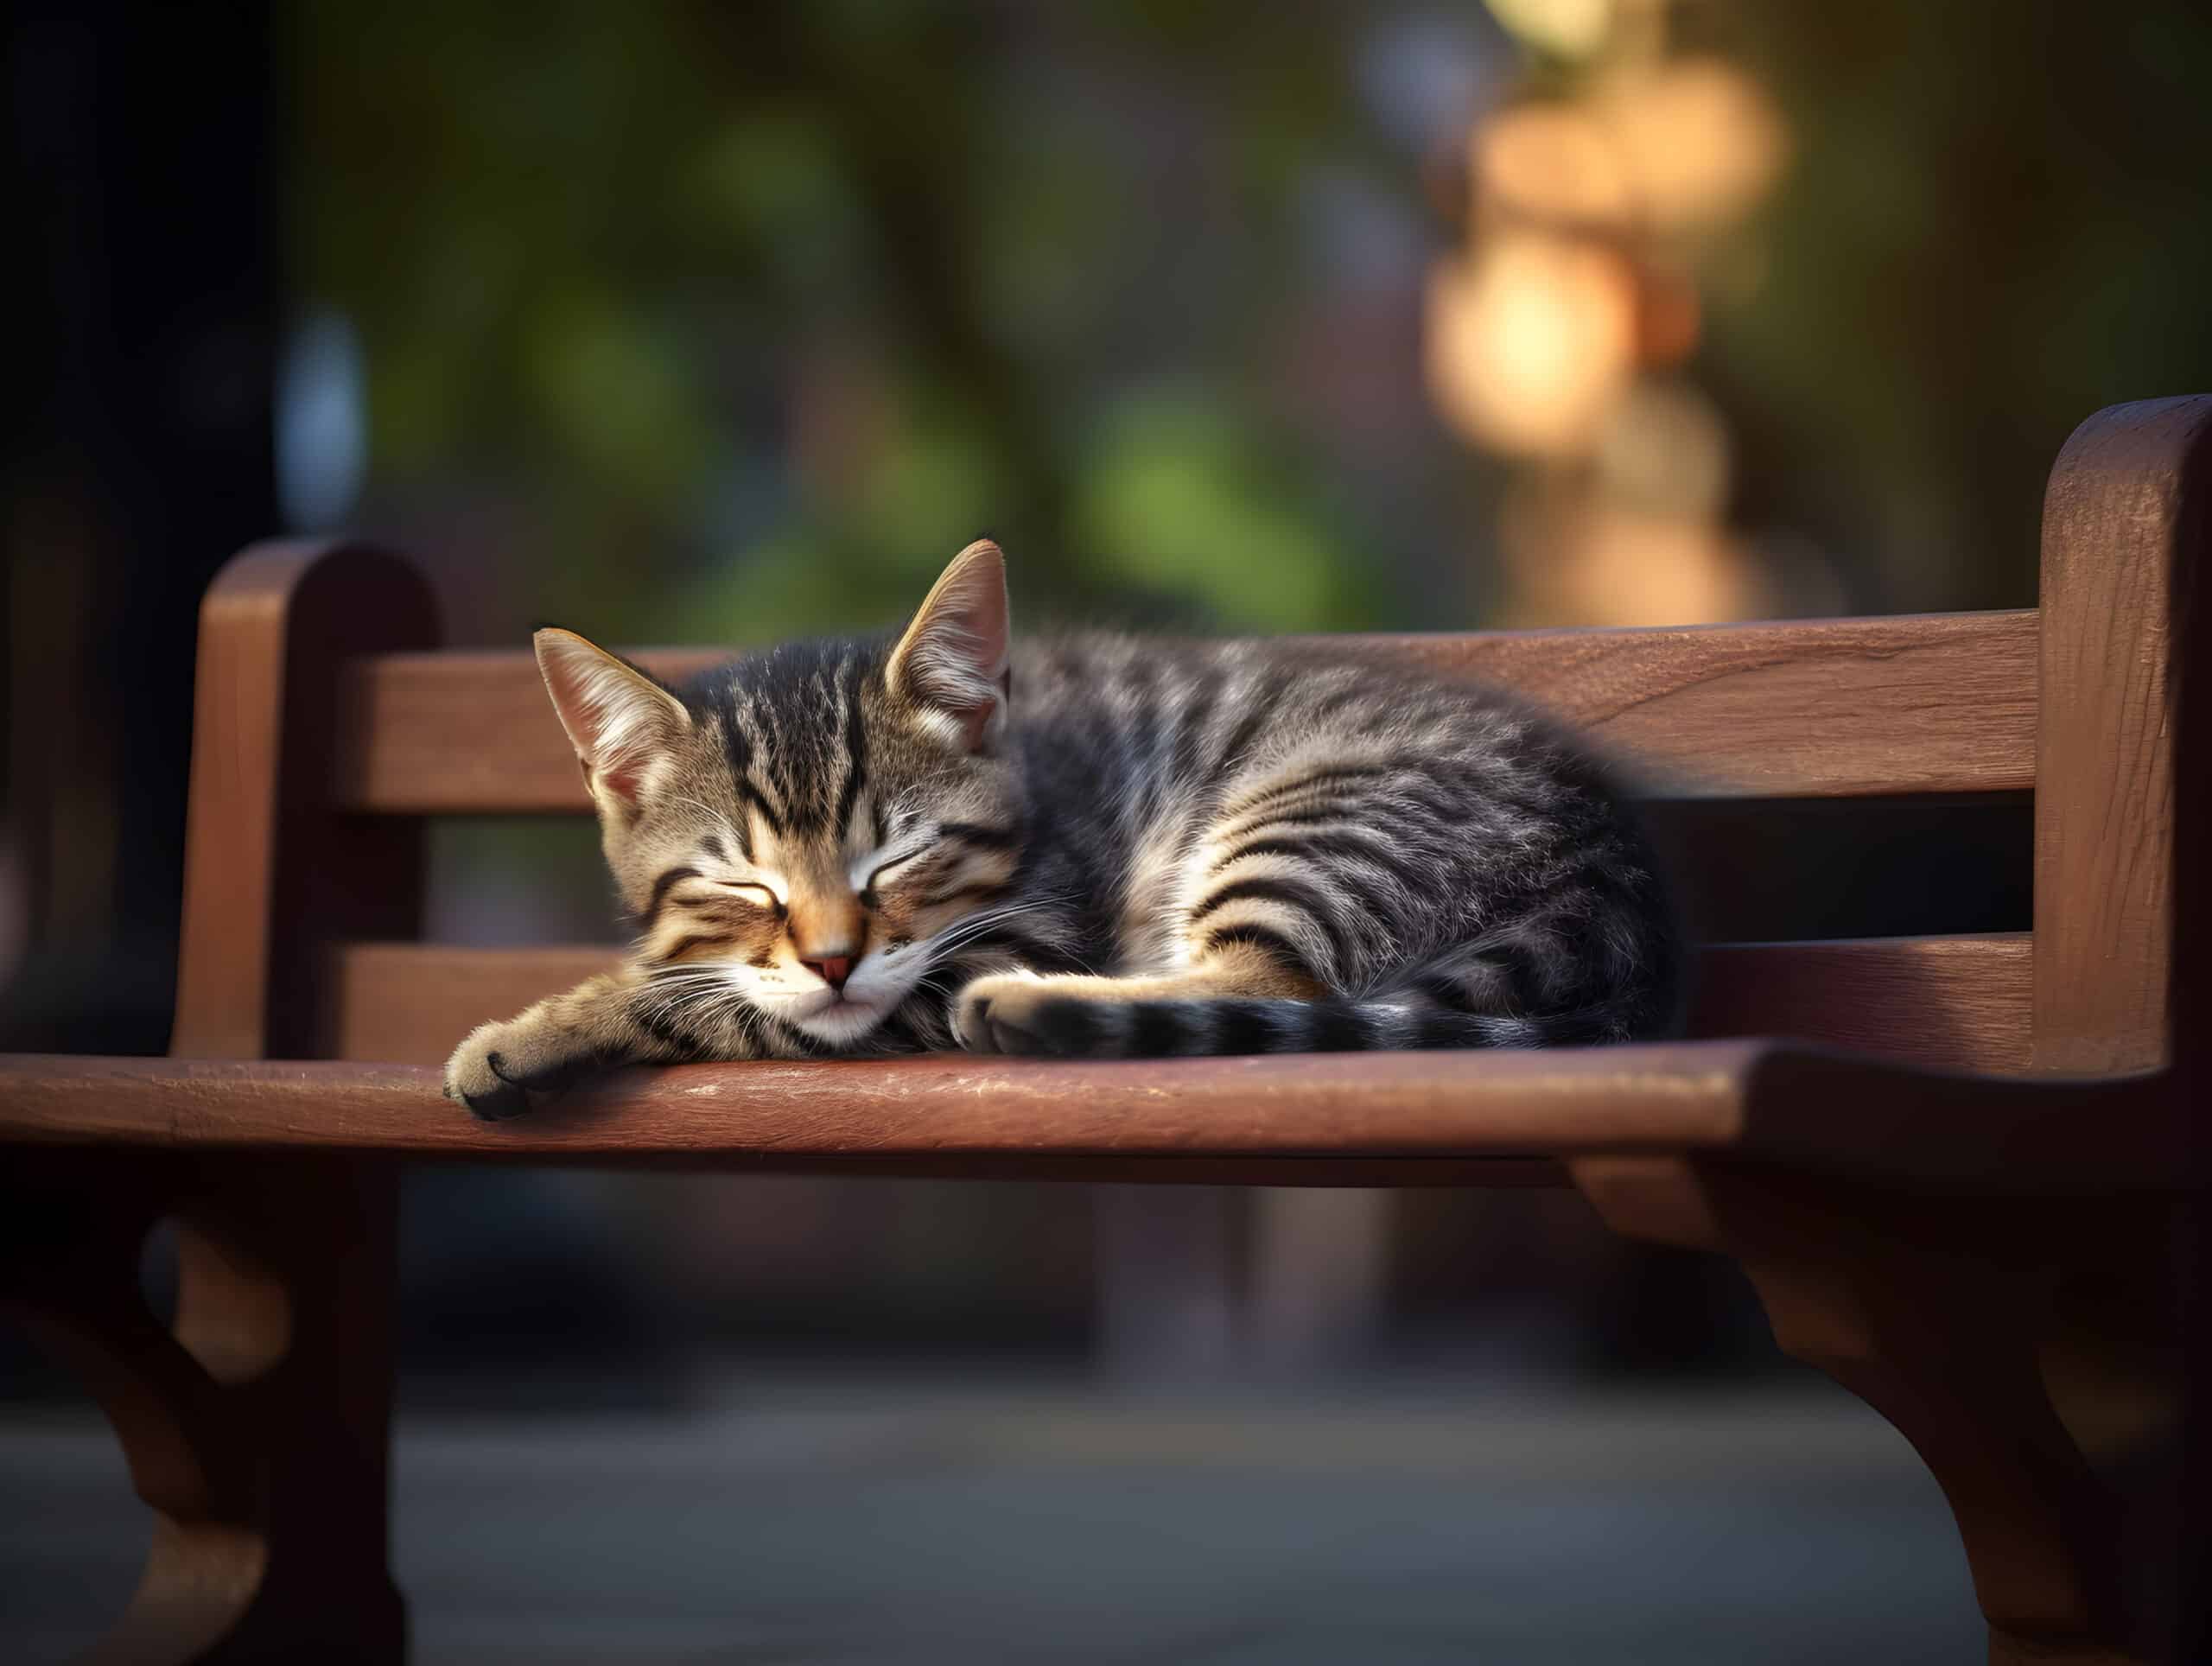 www.appr.com : How To Keep Cats Off Patio Furniture?